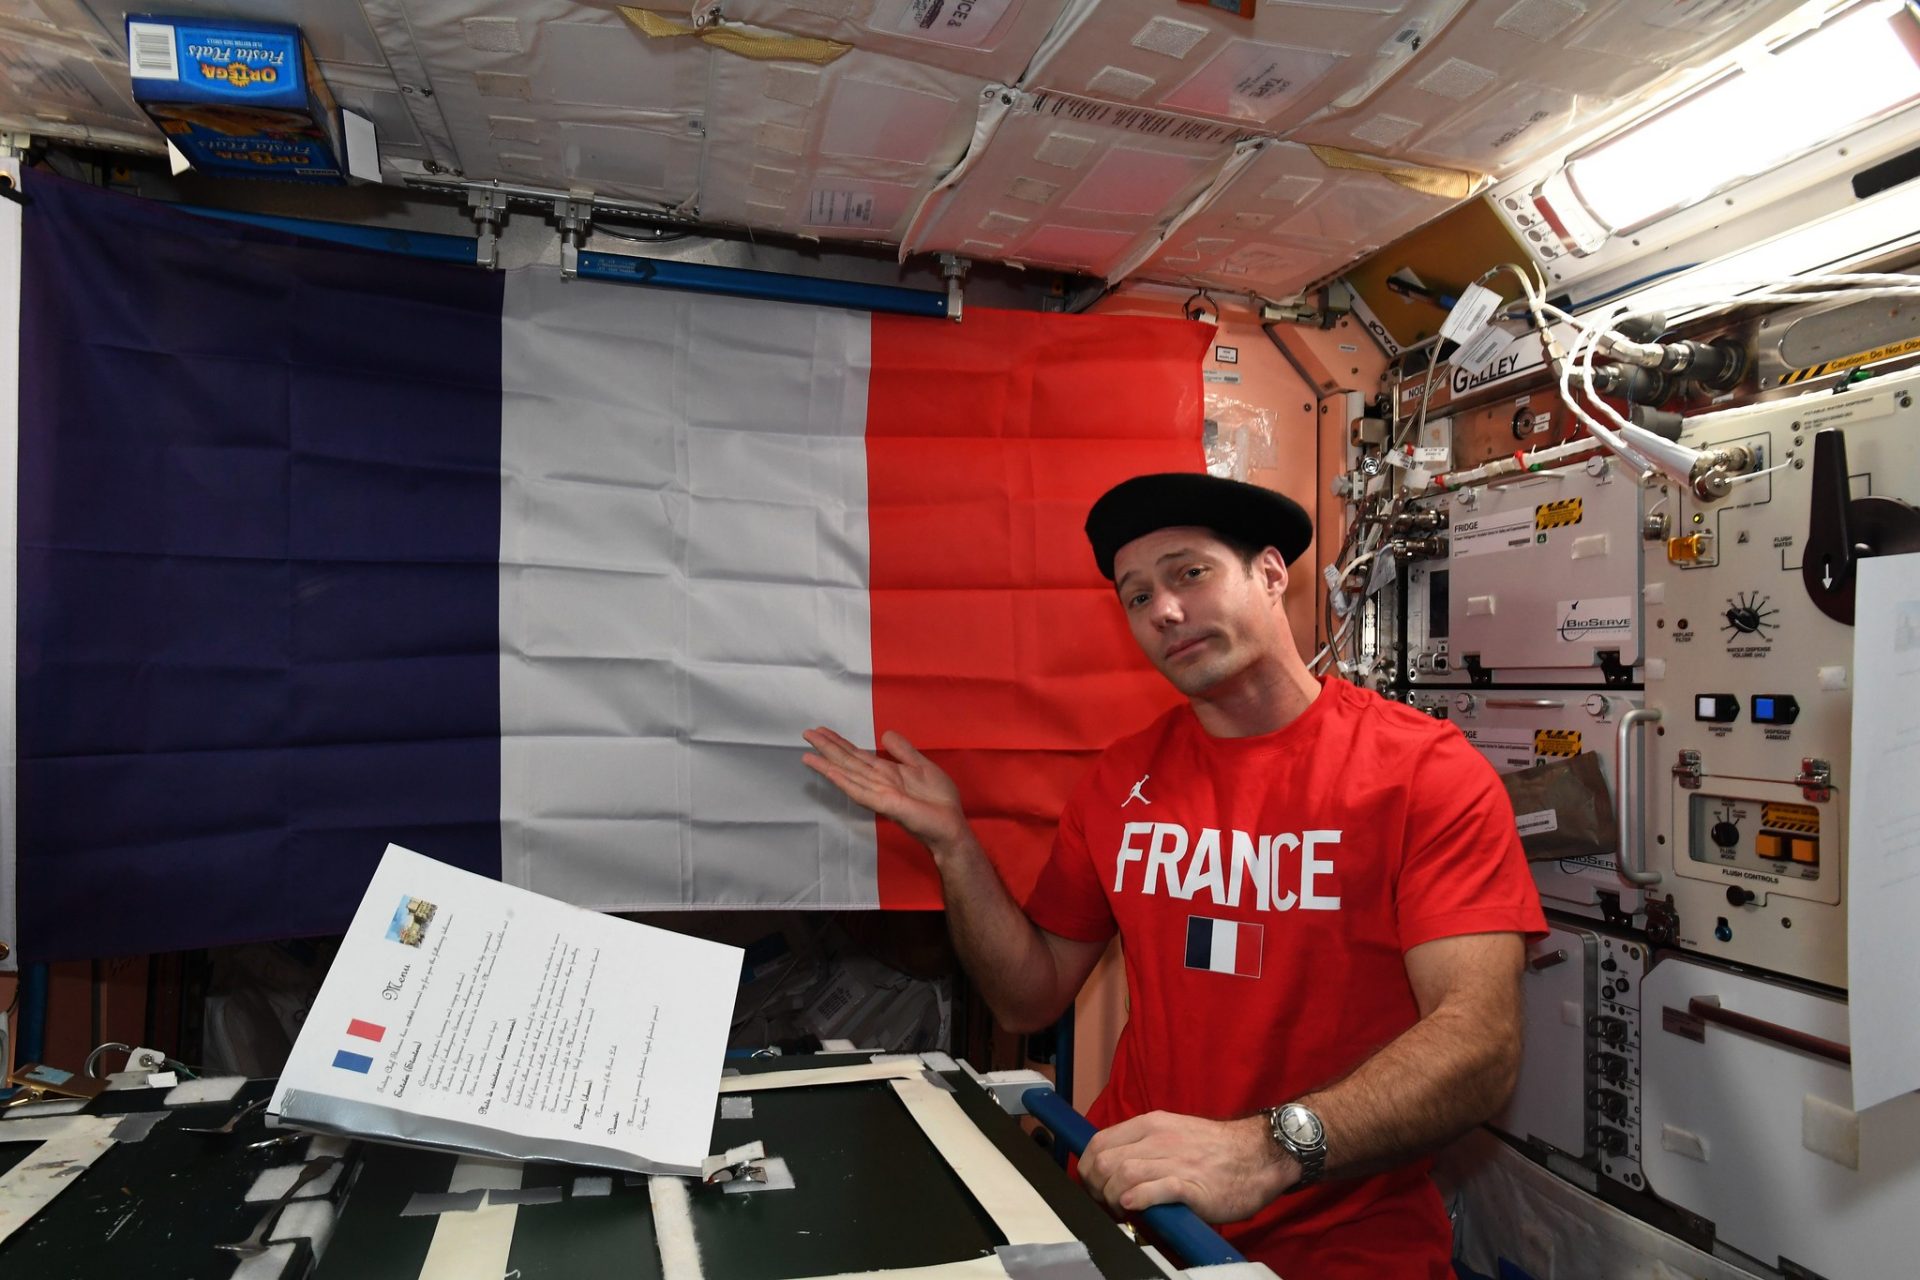 Here’s how a French astronaut approved 14 july 2021 in location